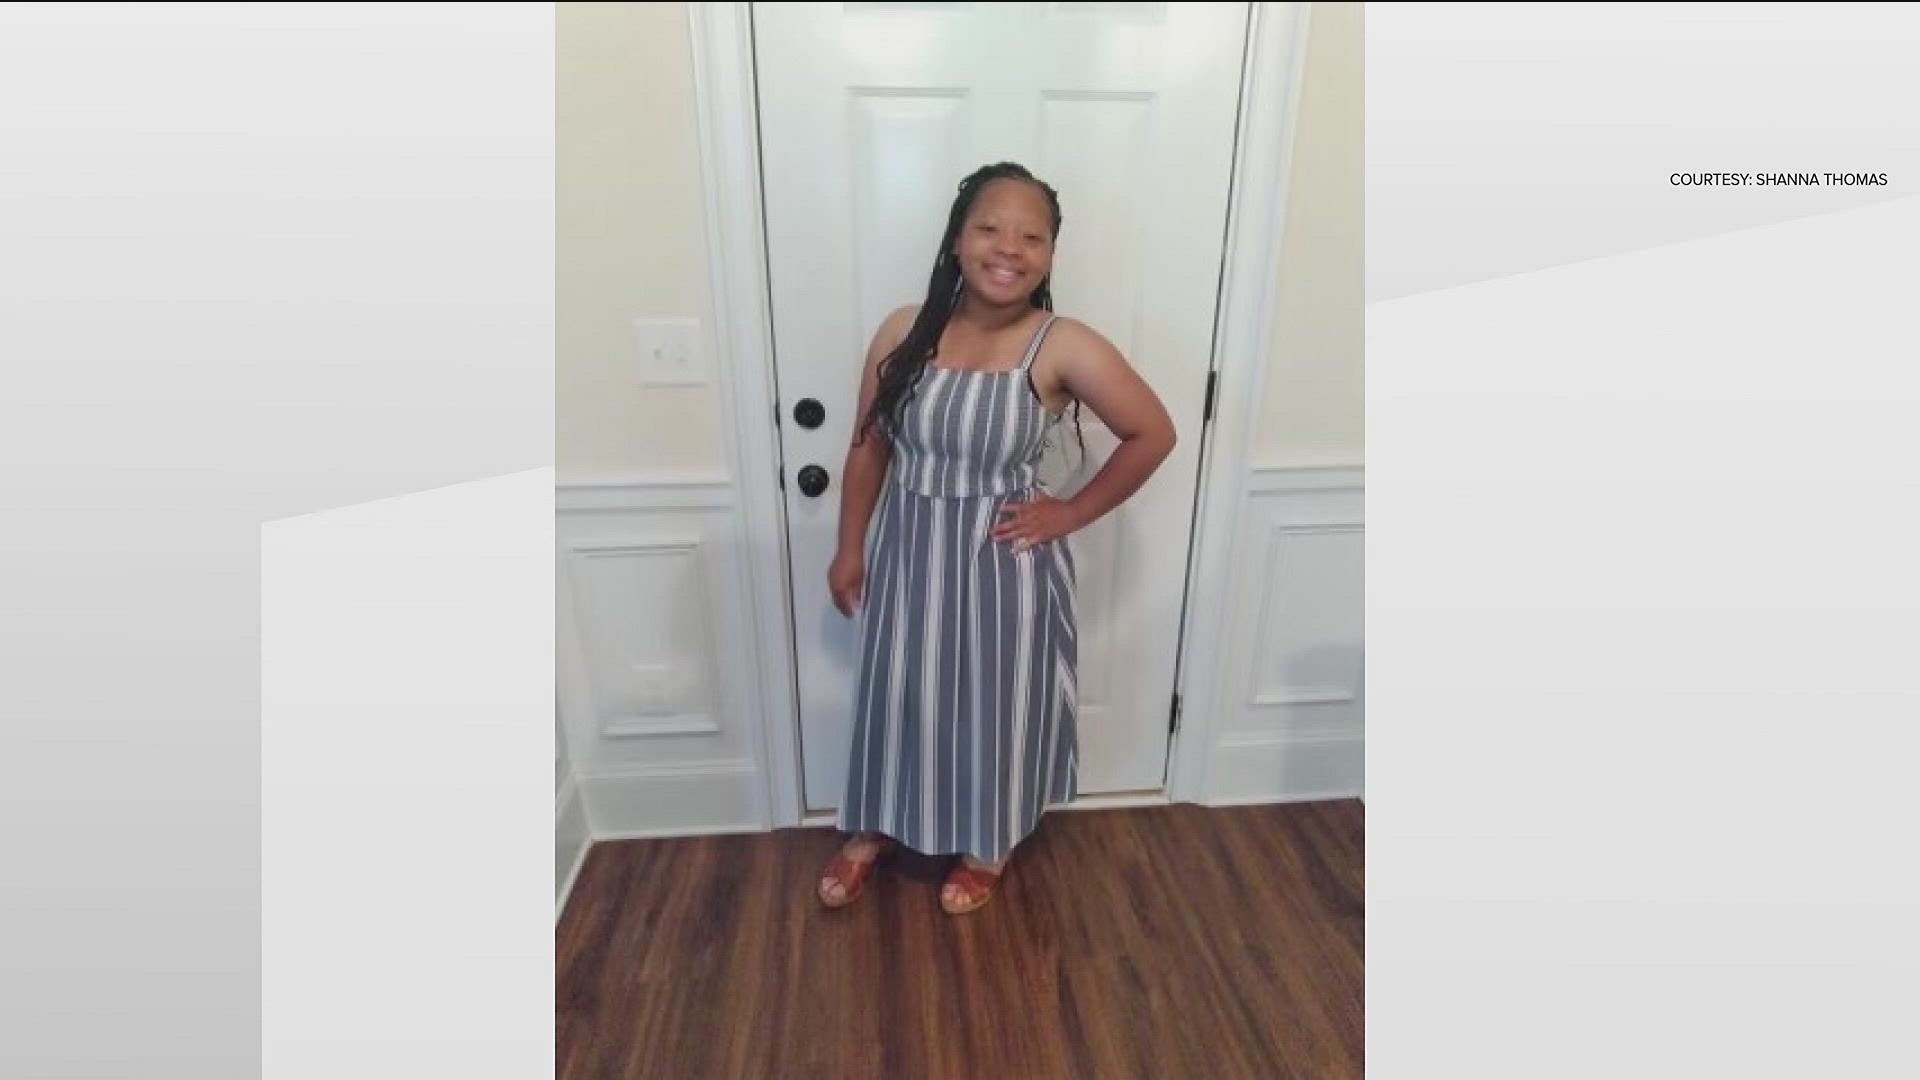 Kendall Elise Thomas was using a crosswalk on campus when she was struck by a vehicle.